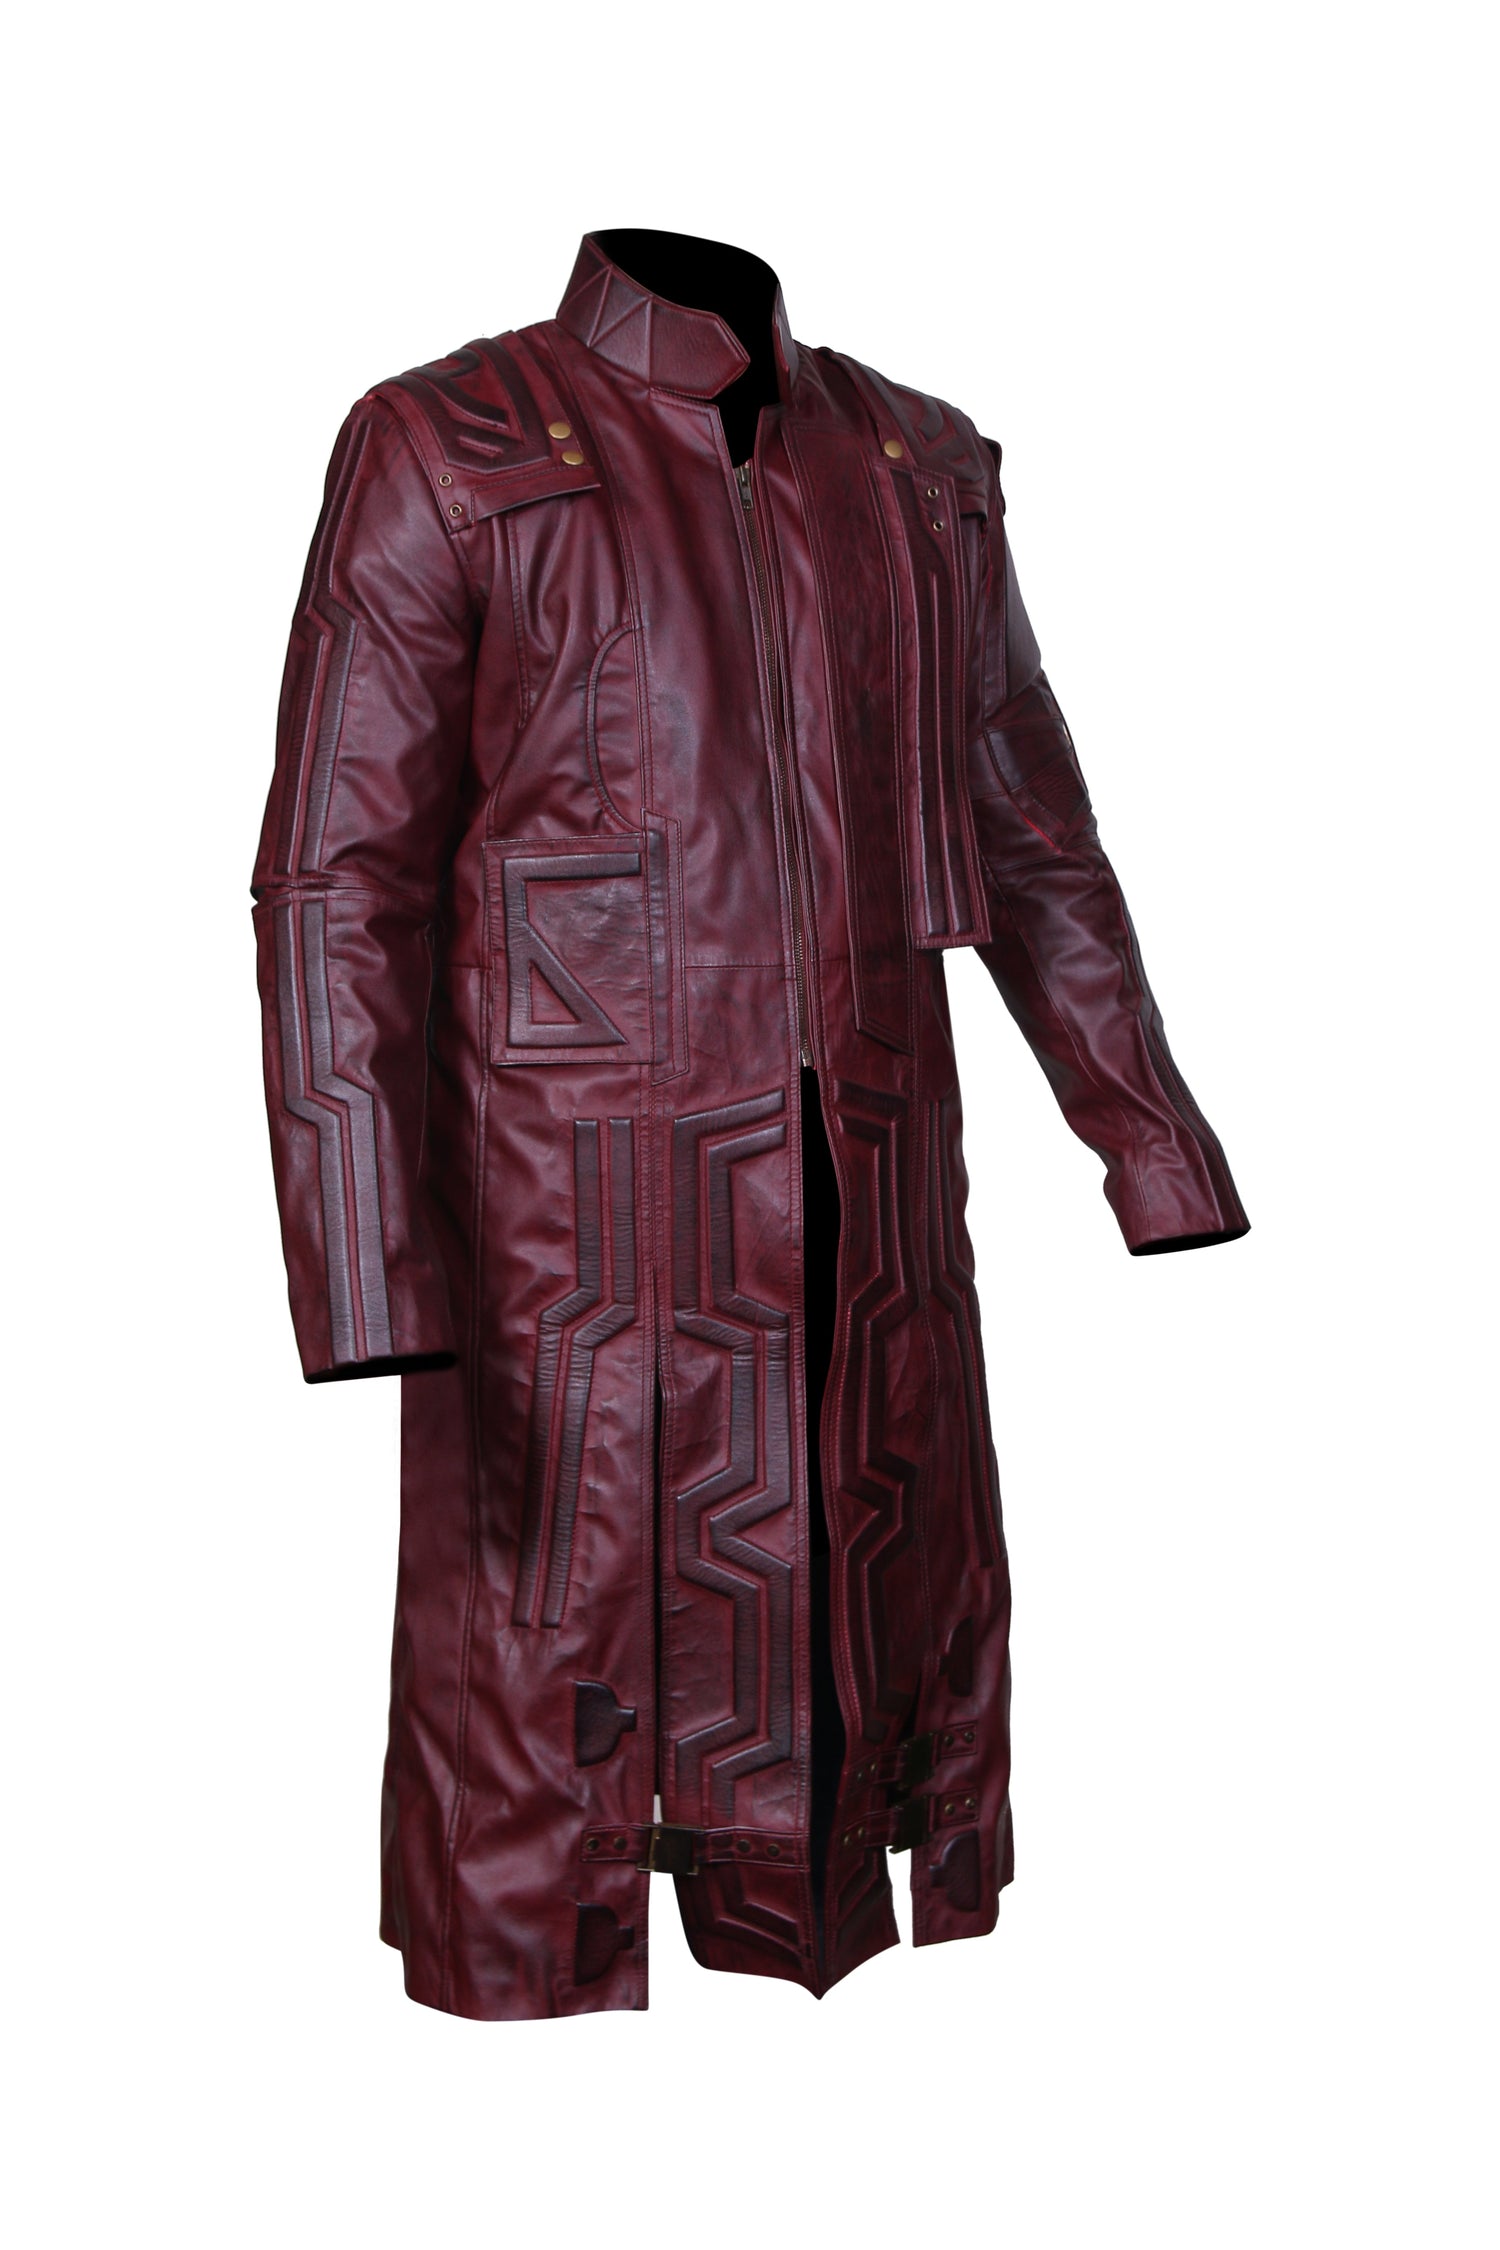 Men's New American Trench Maroon Leather Coat – South Beach Leather